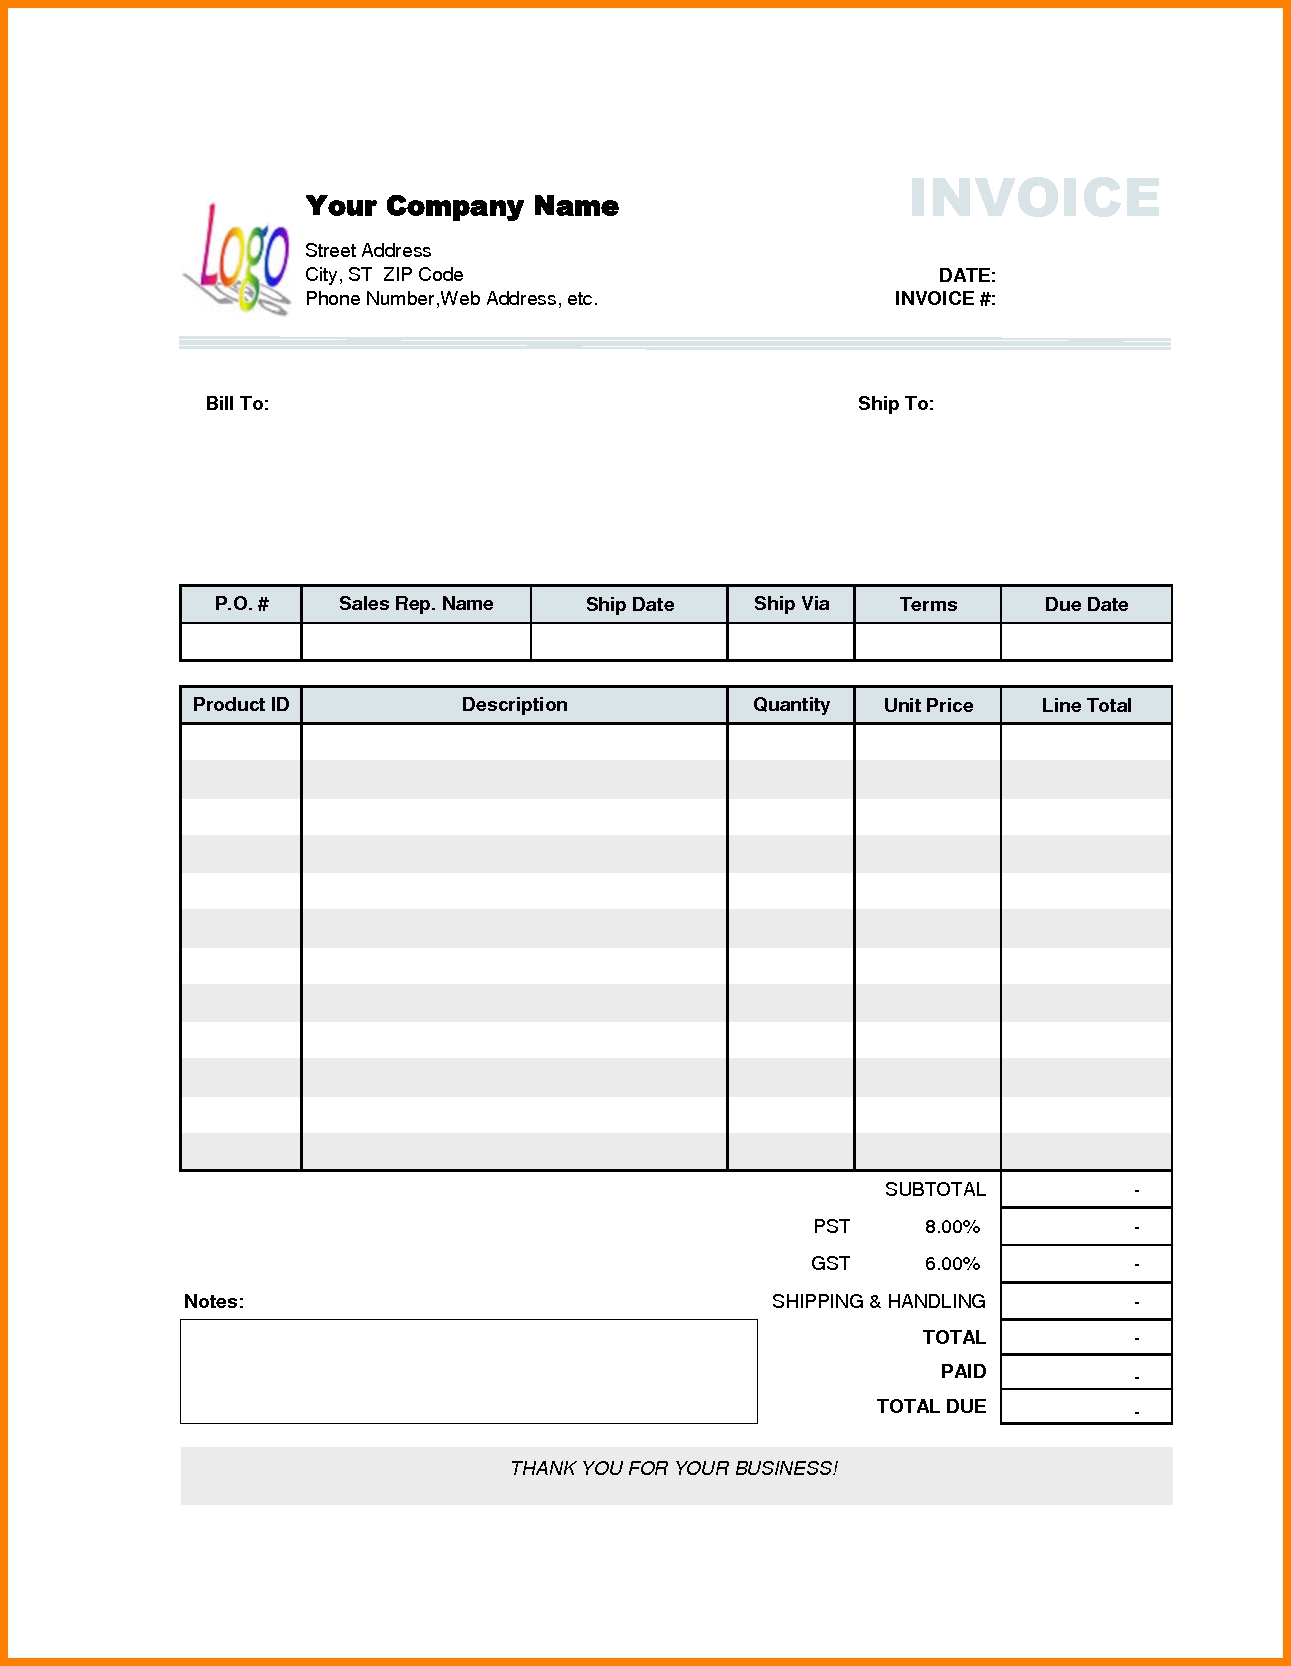 samples of invoices invoices samples free neilsafe 1291 X 1666